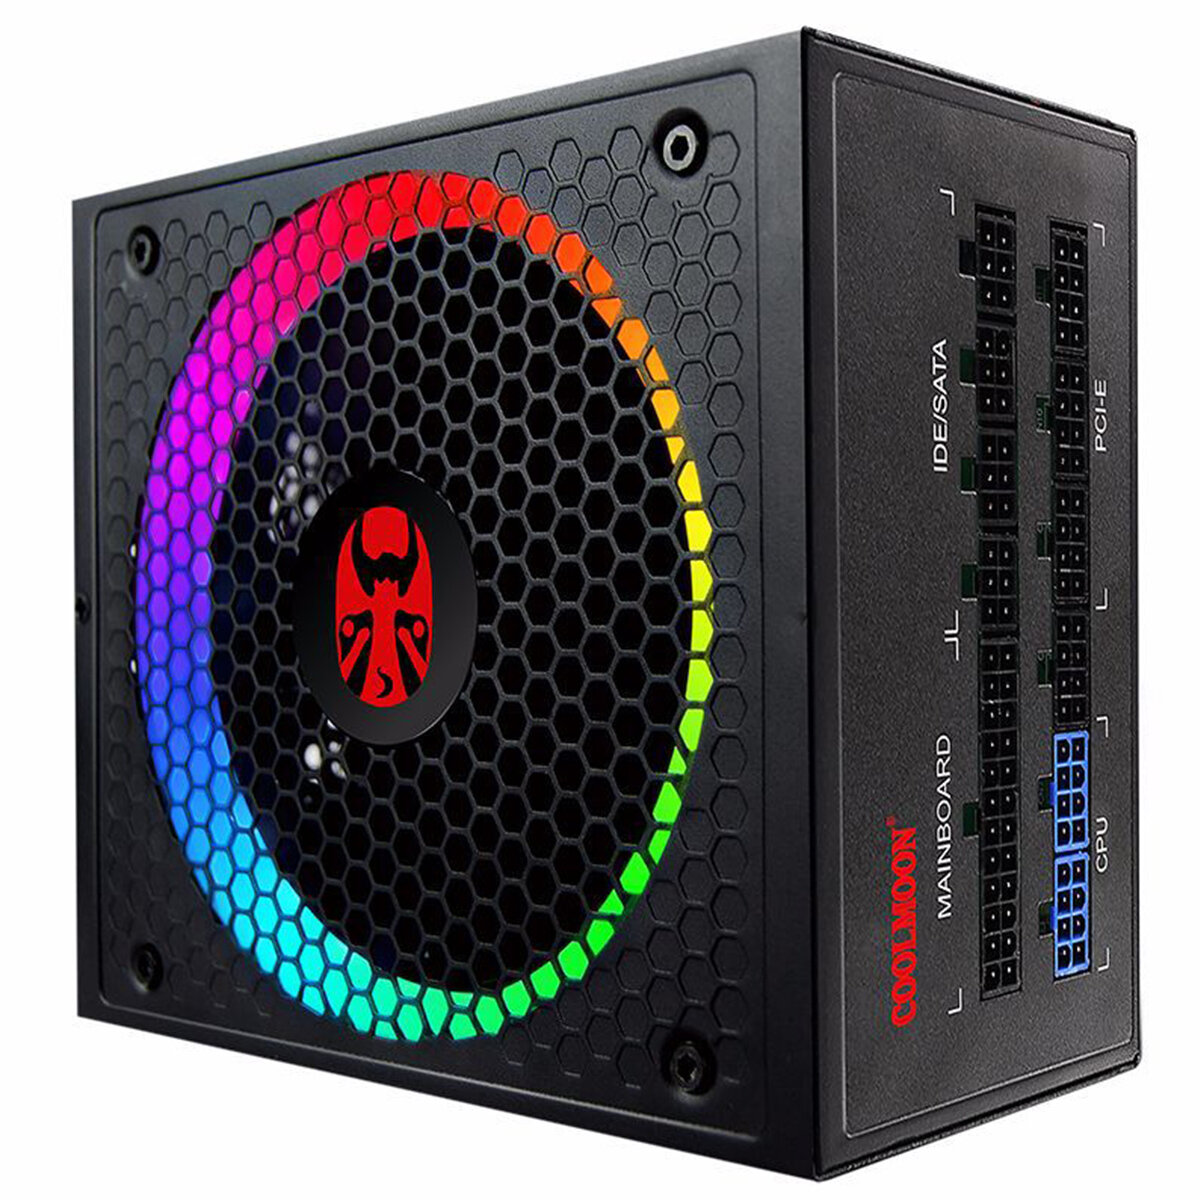 

PC Power Supply 80 Plus Gold 850W ATX RGB Fully Modular 14cm Smart Temperature Control Fan Gaming Computer PC Power Supp